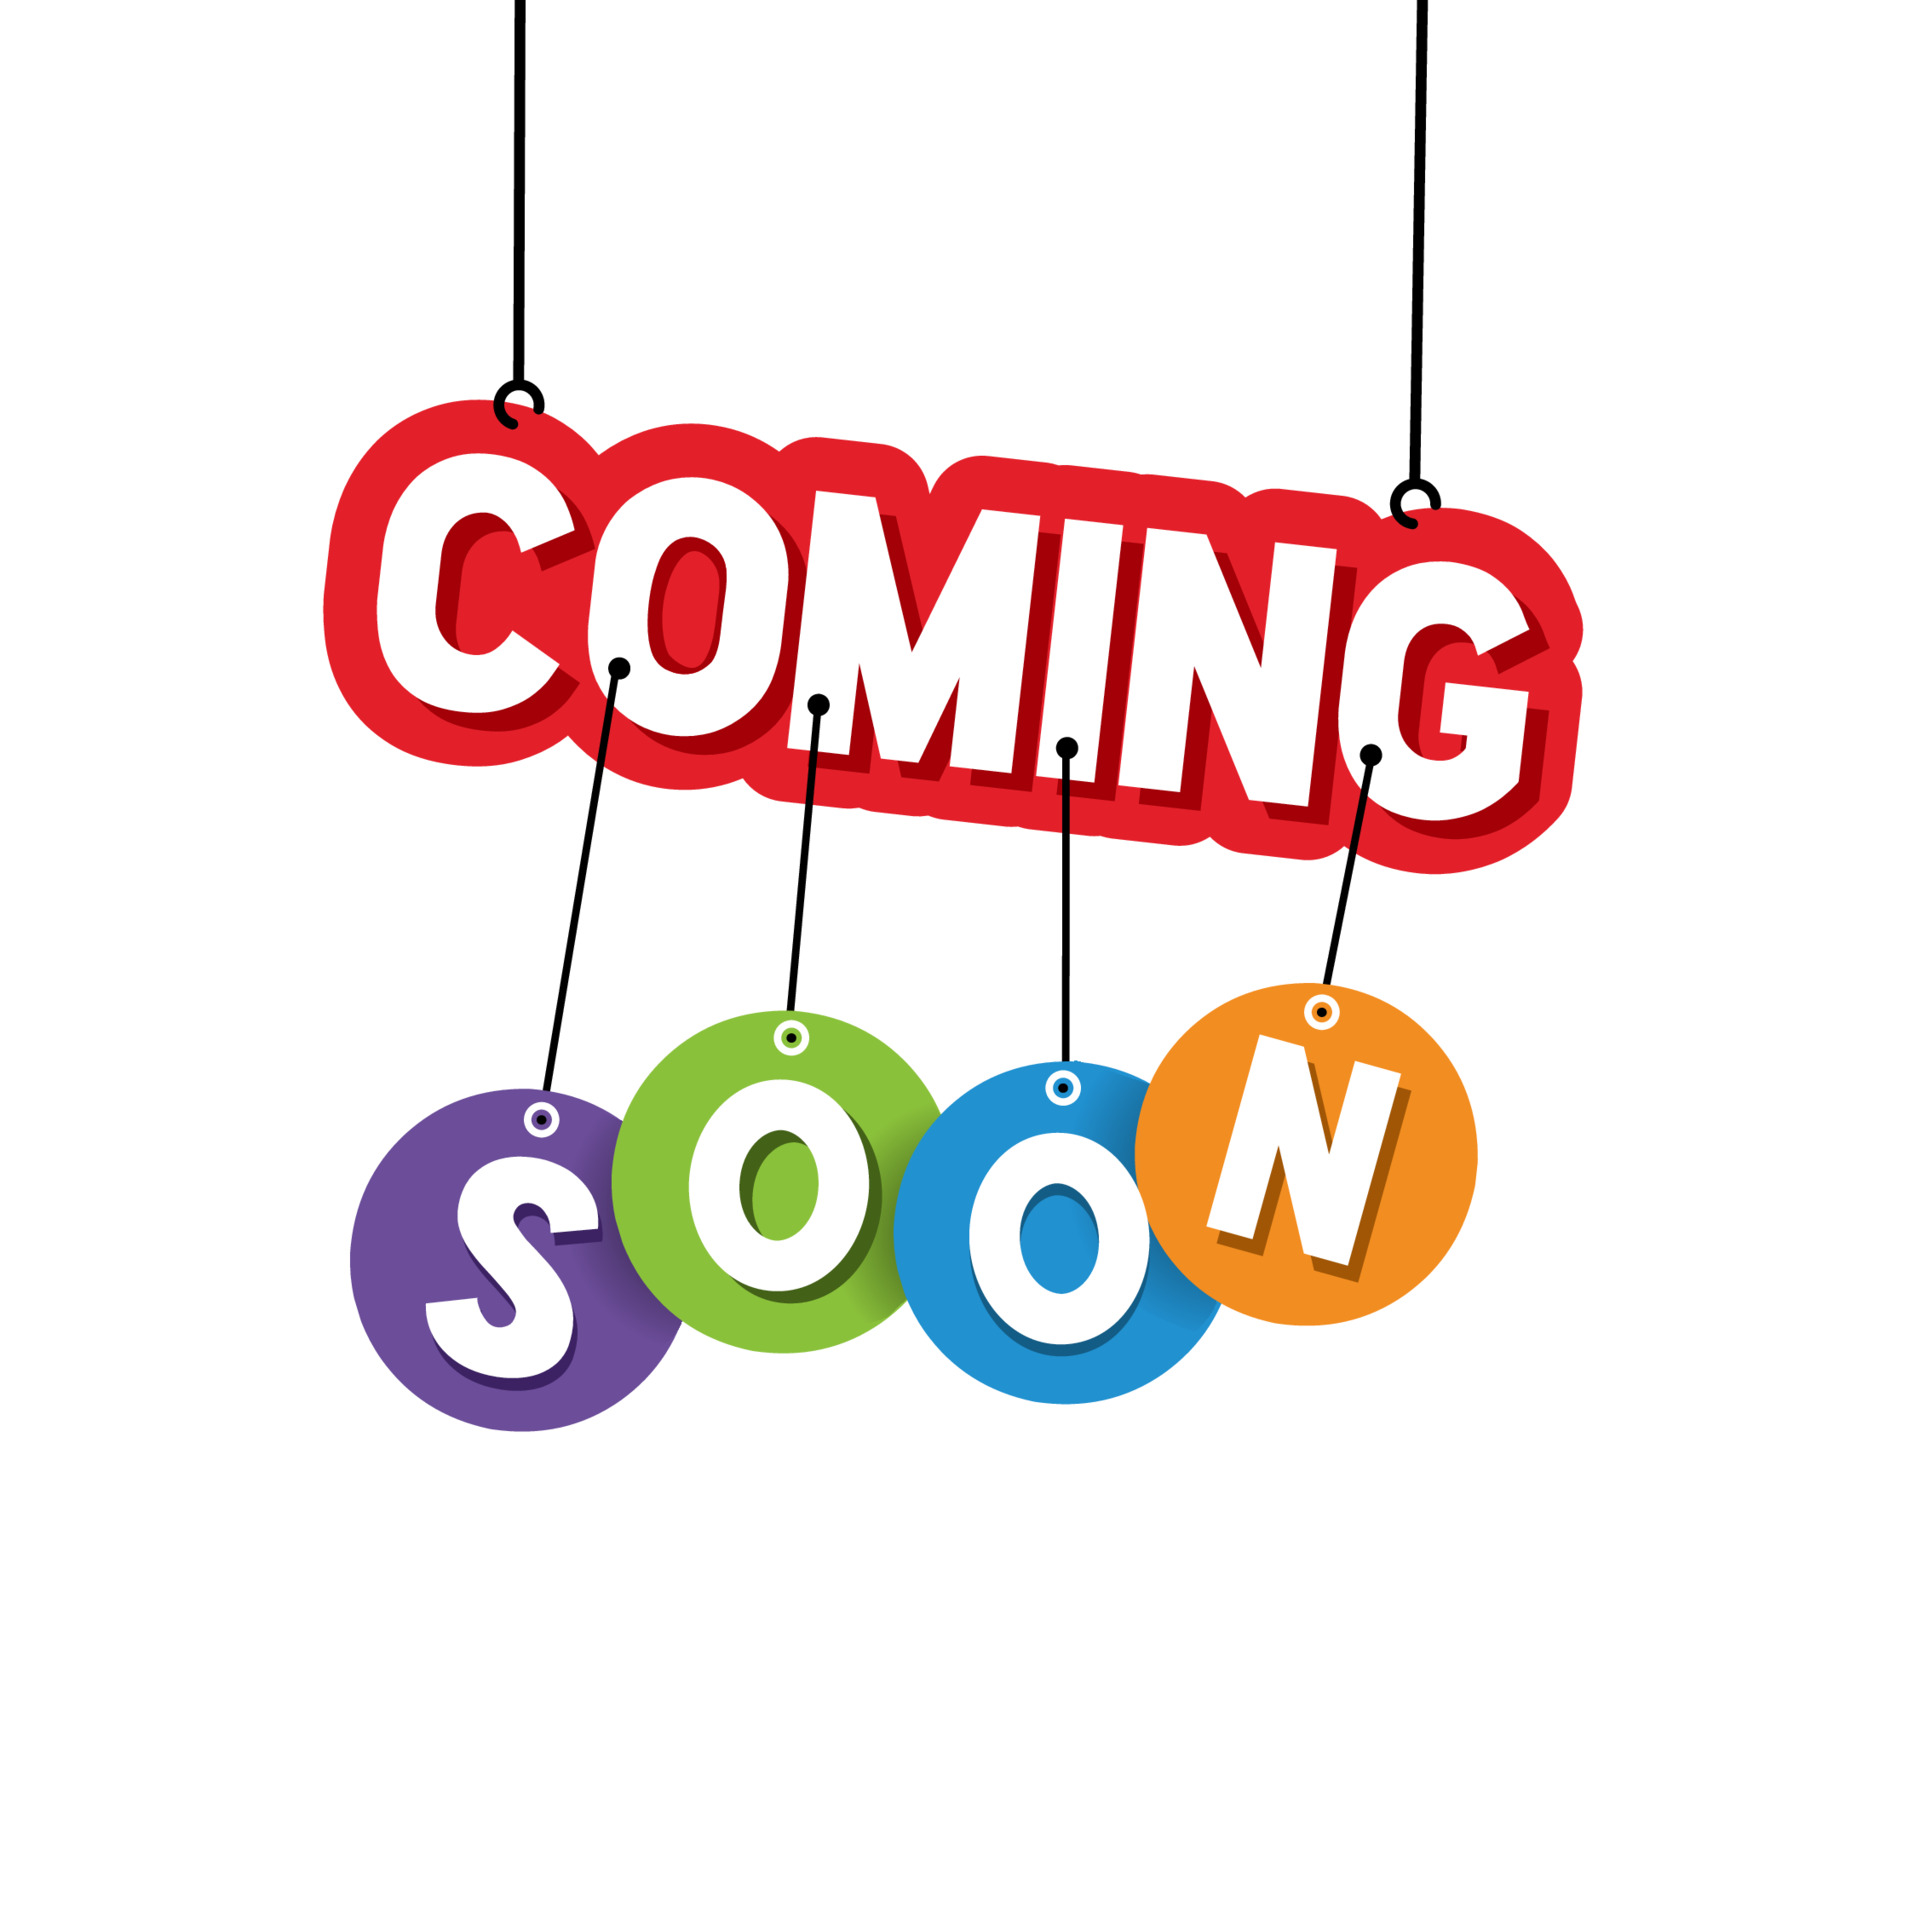 vecteezy_coming-soon-banner-hanging-word-design-open-available-now_19902144